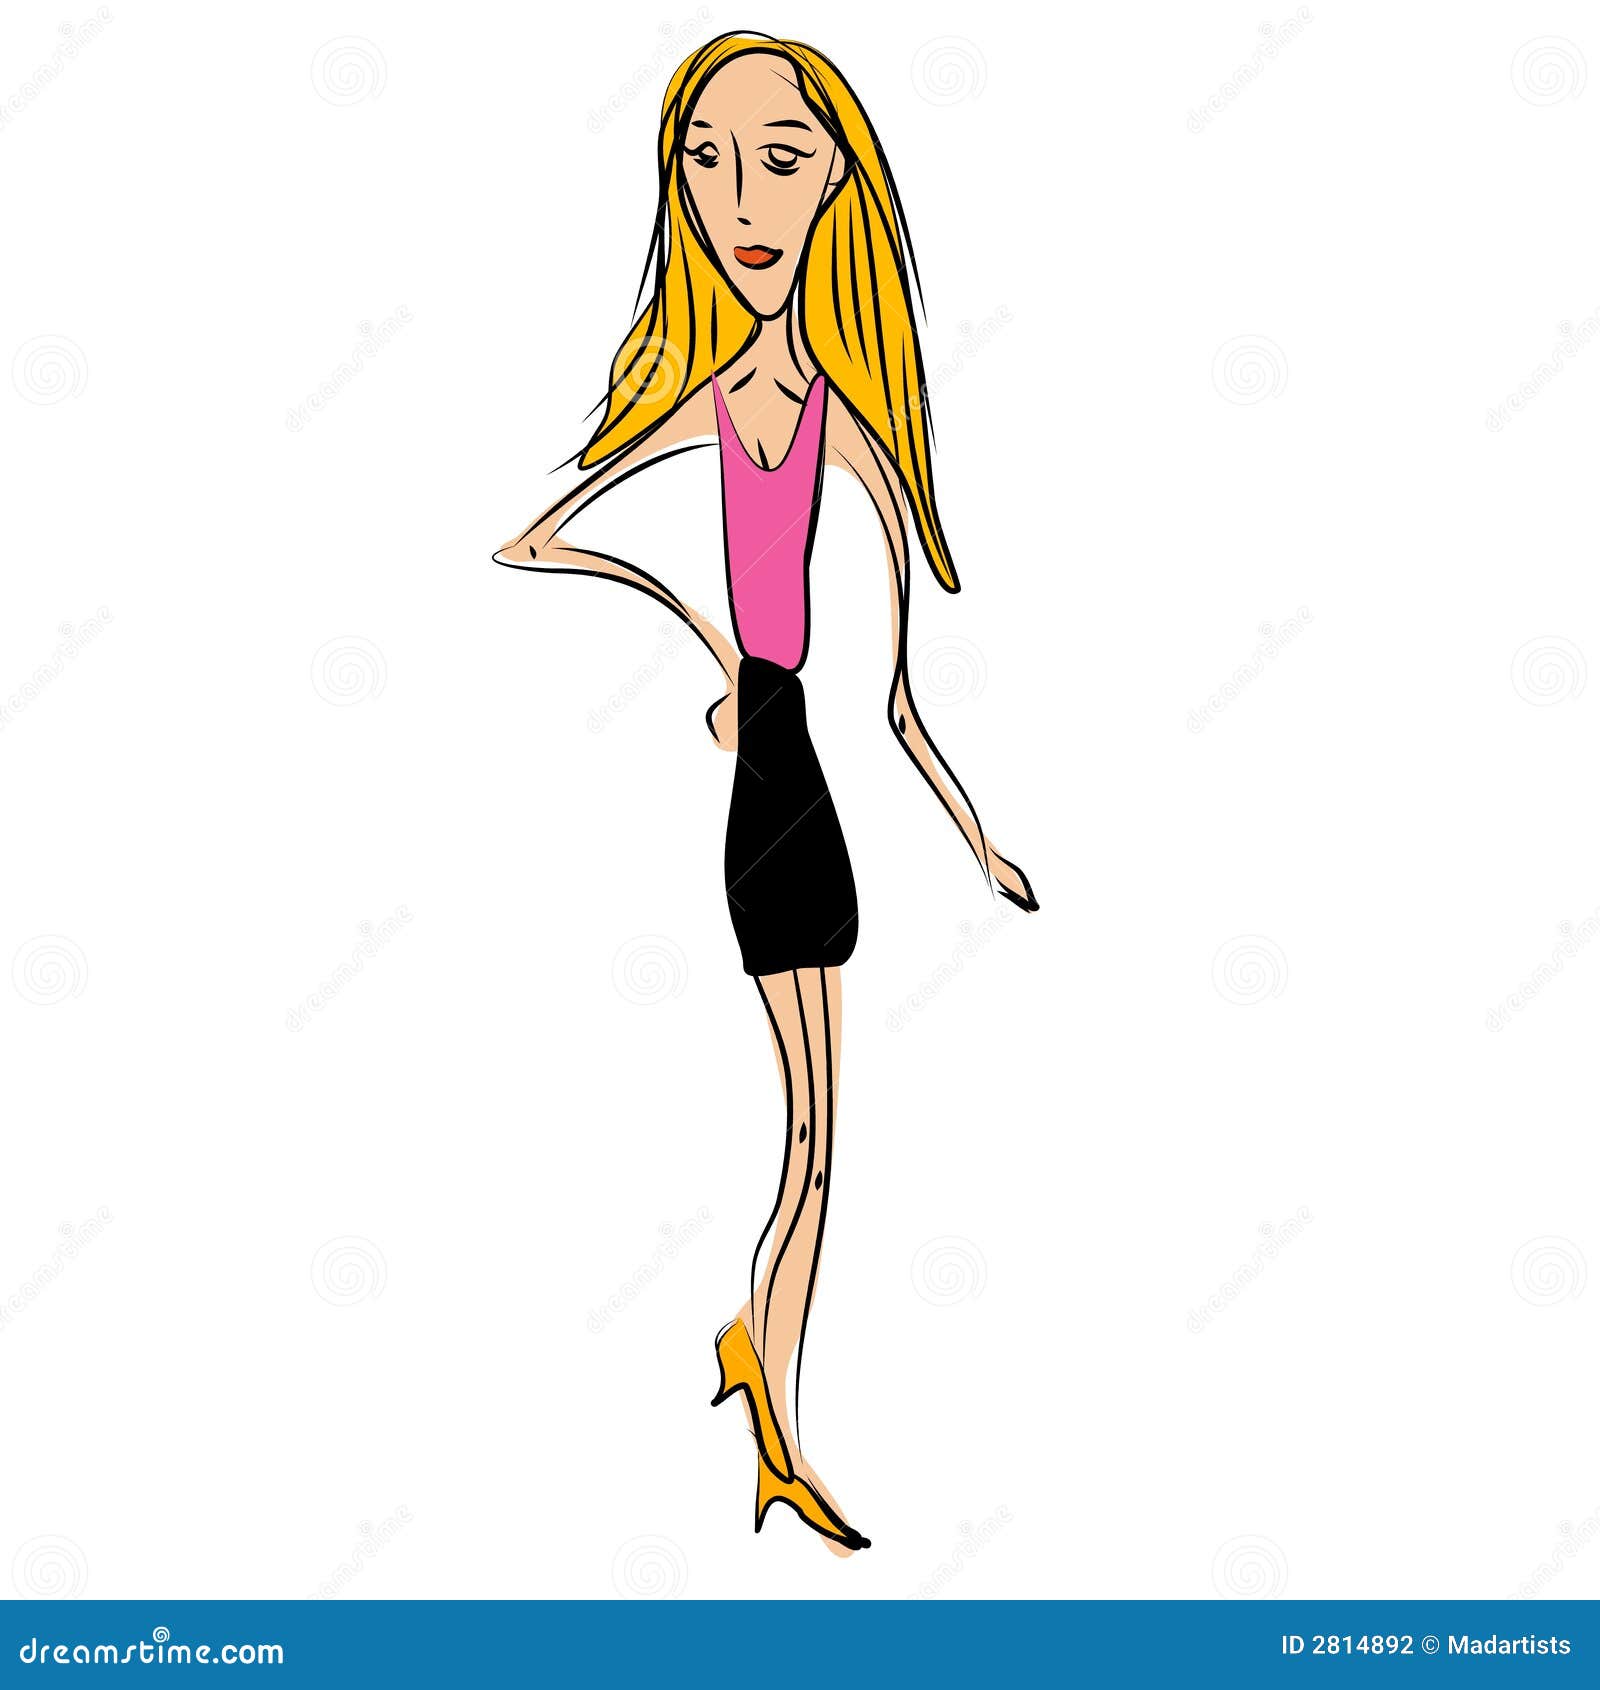 Too Thin Woman Anorexia Model Stock Illustration - Illustration of blond,  drawn: 2814892